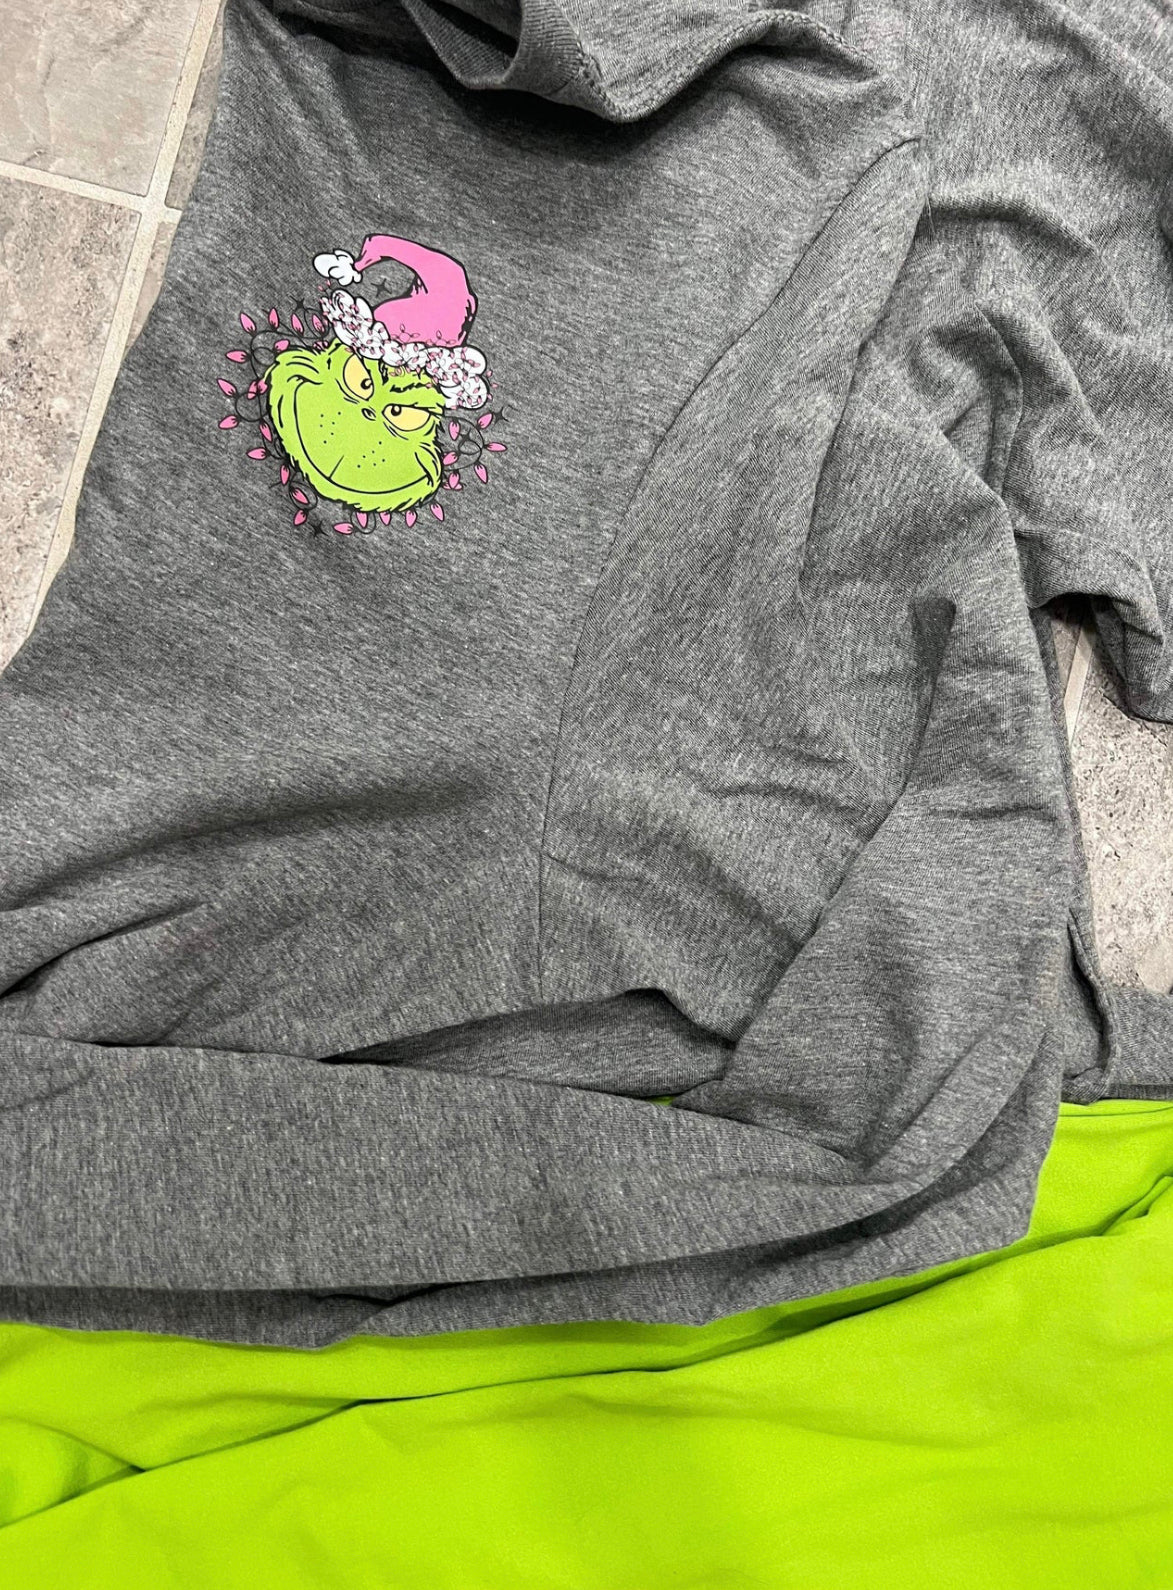 The Grinch Tee